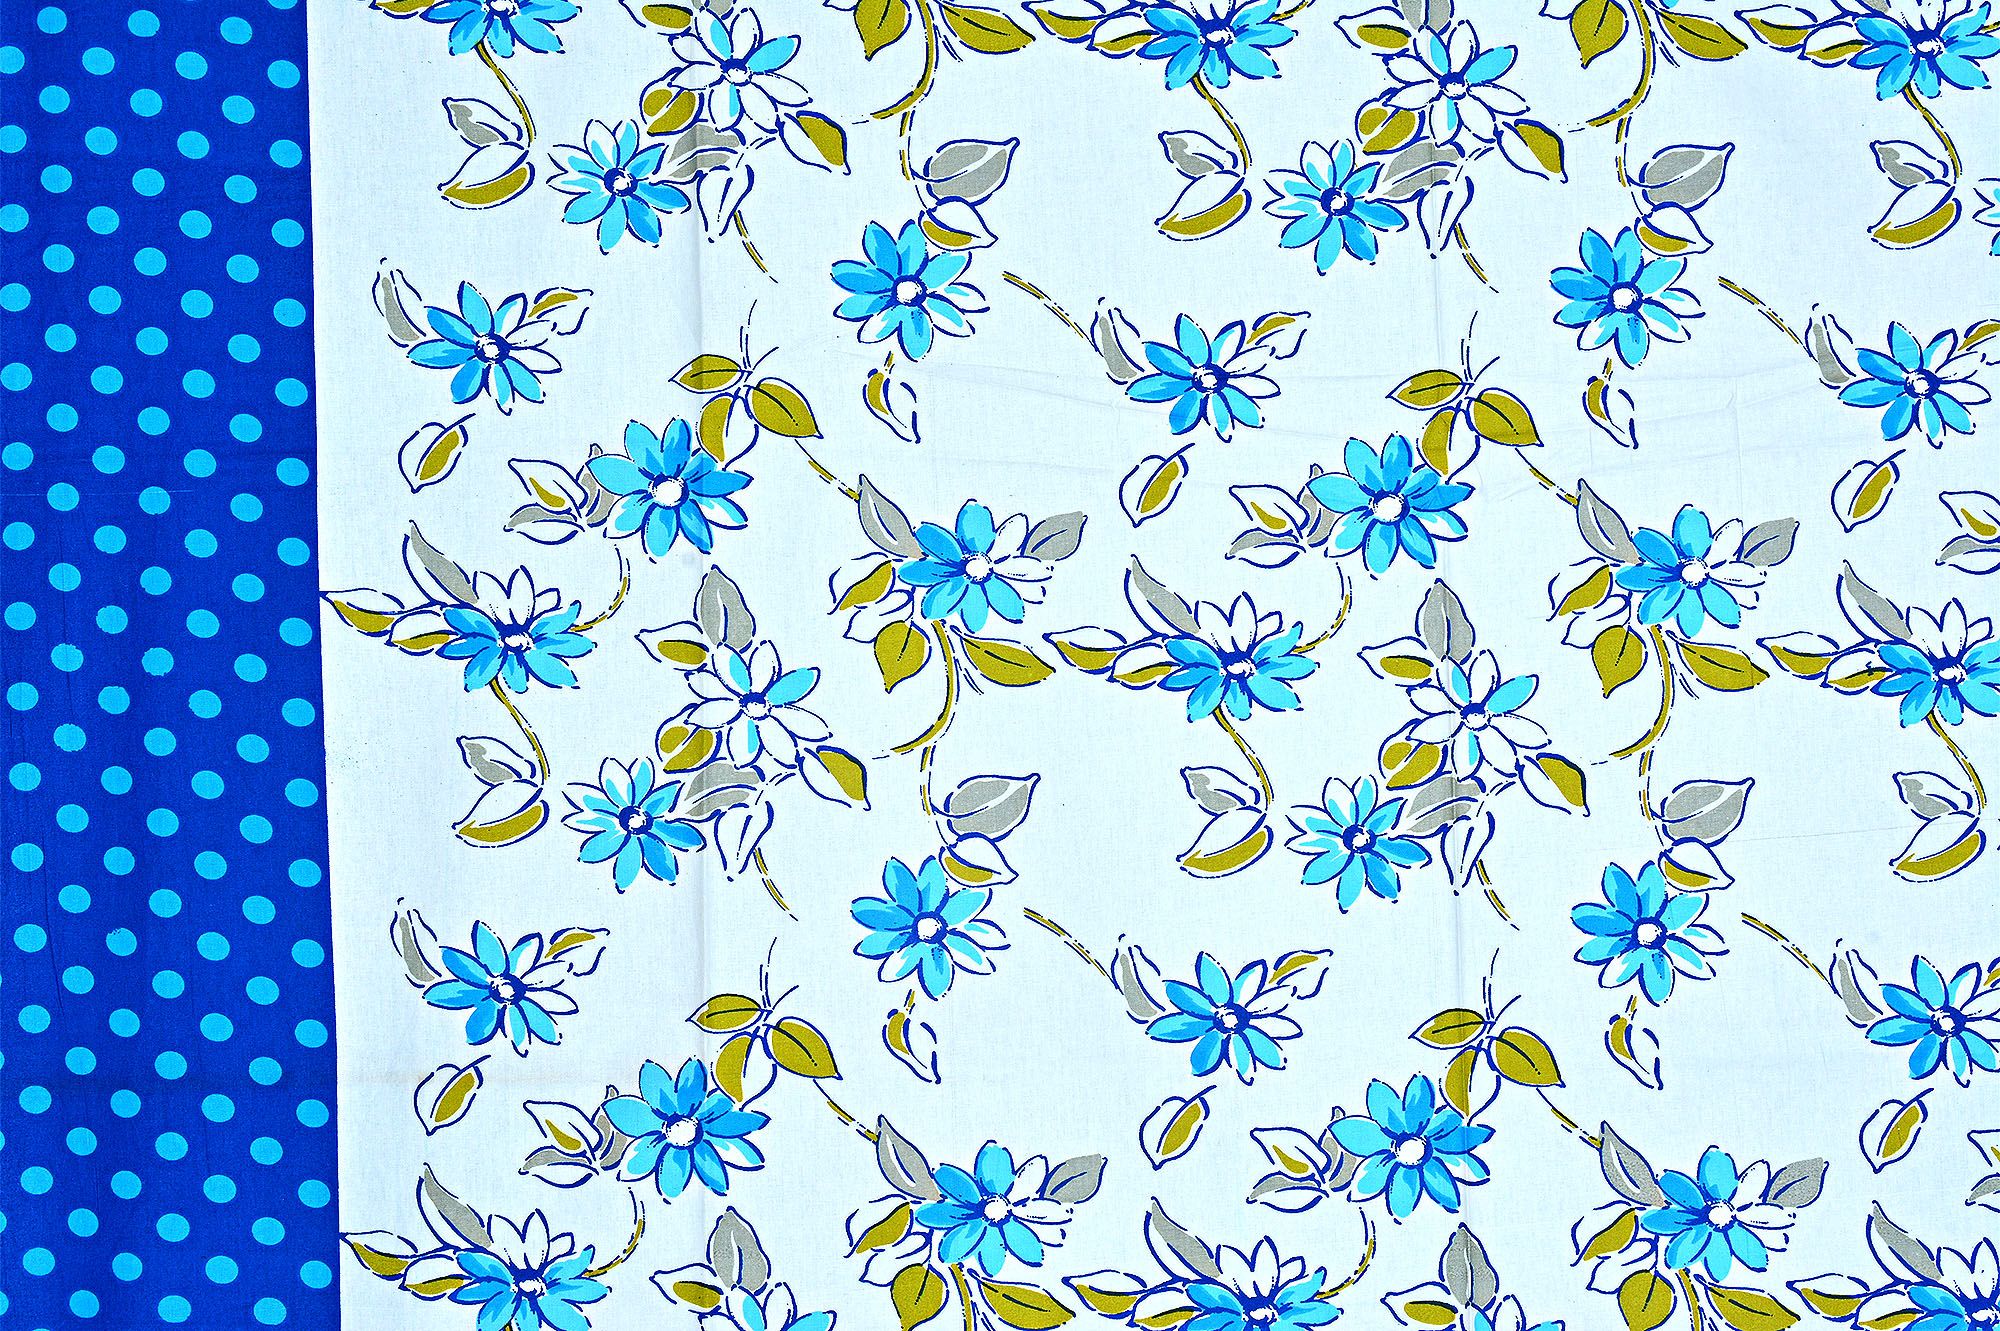 Blue Border With Light Blue  Polka Dot And White Base With Blue Flower Cotton Single Bed Sheet with 1 pillow Cover